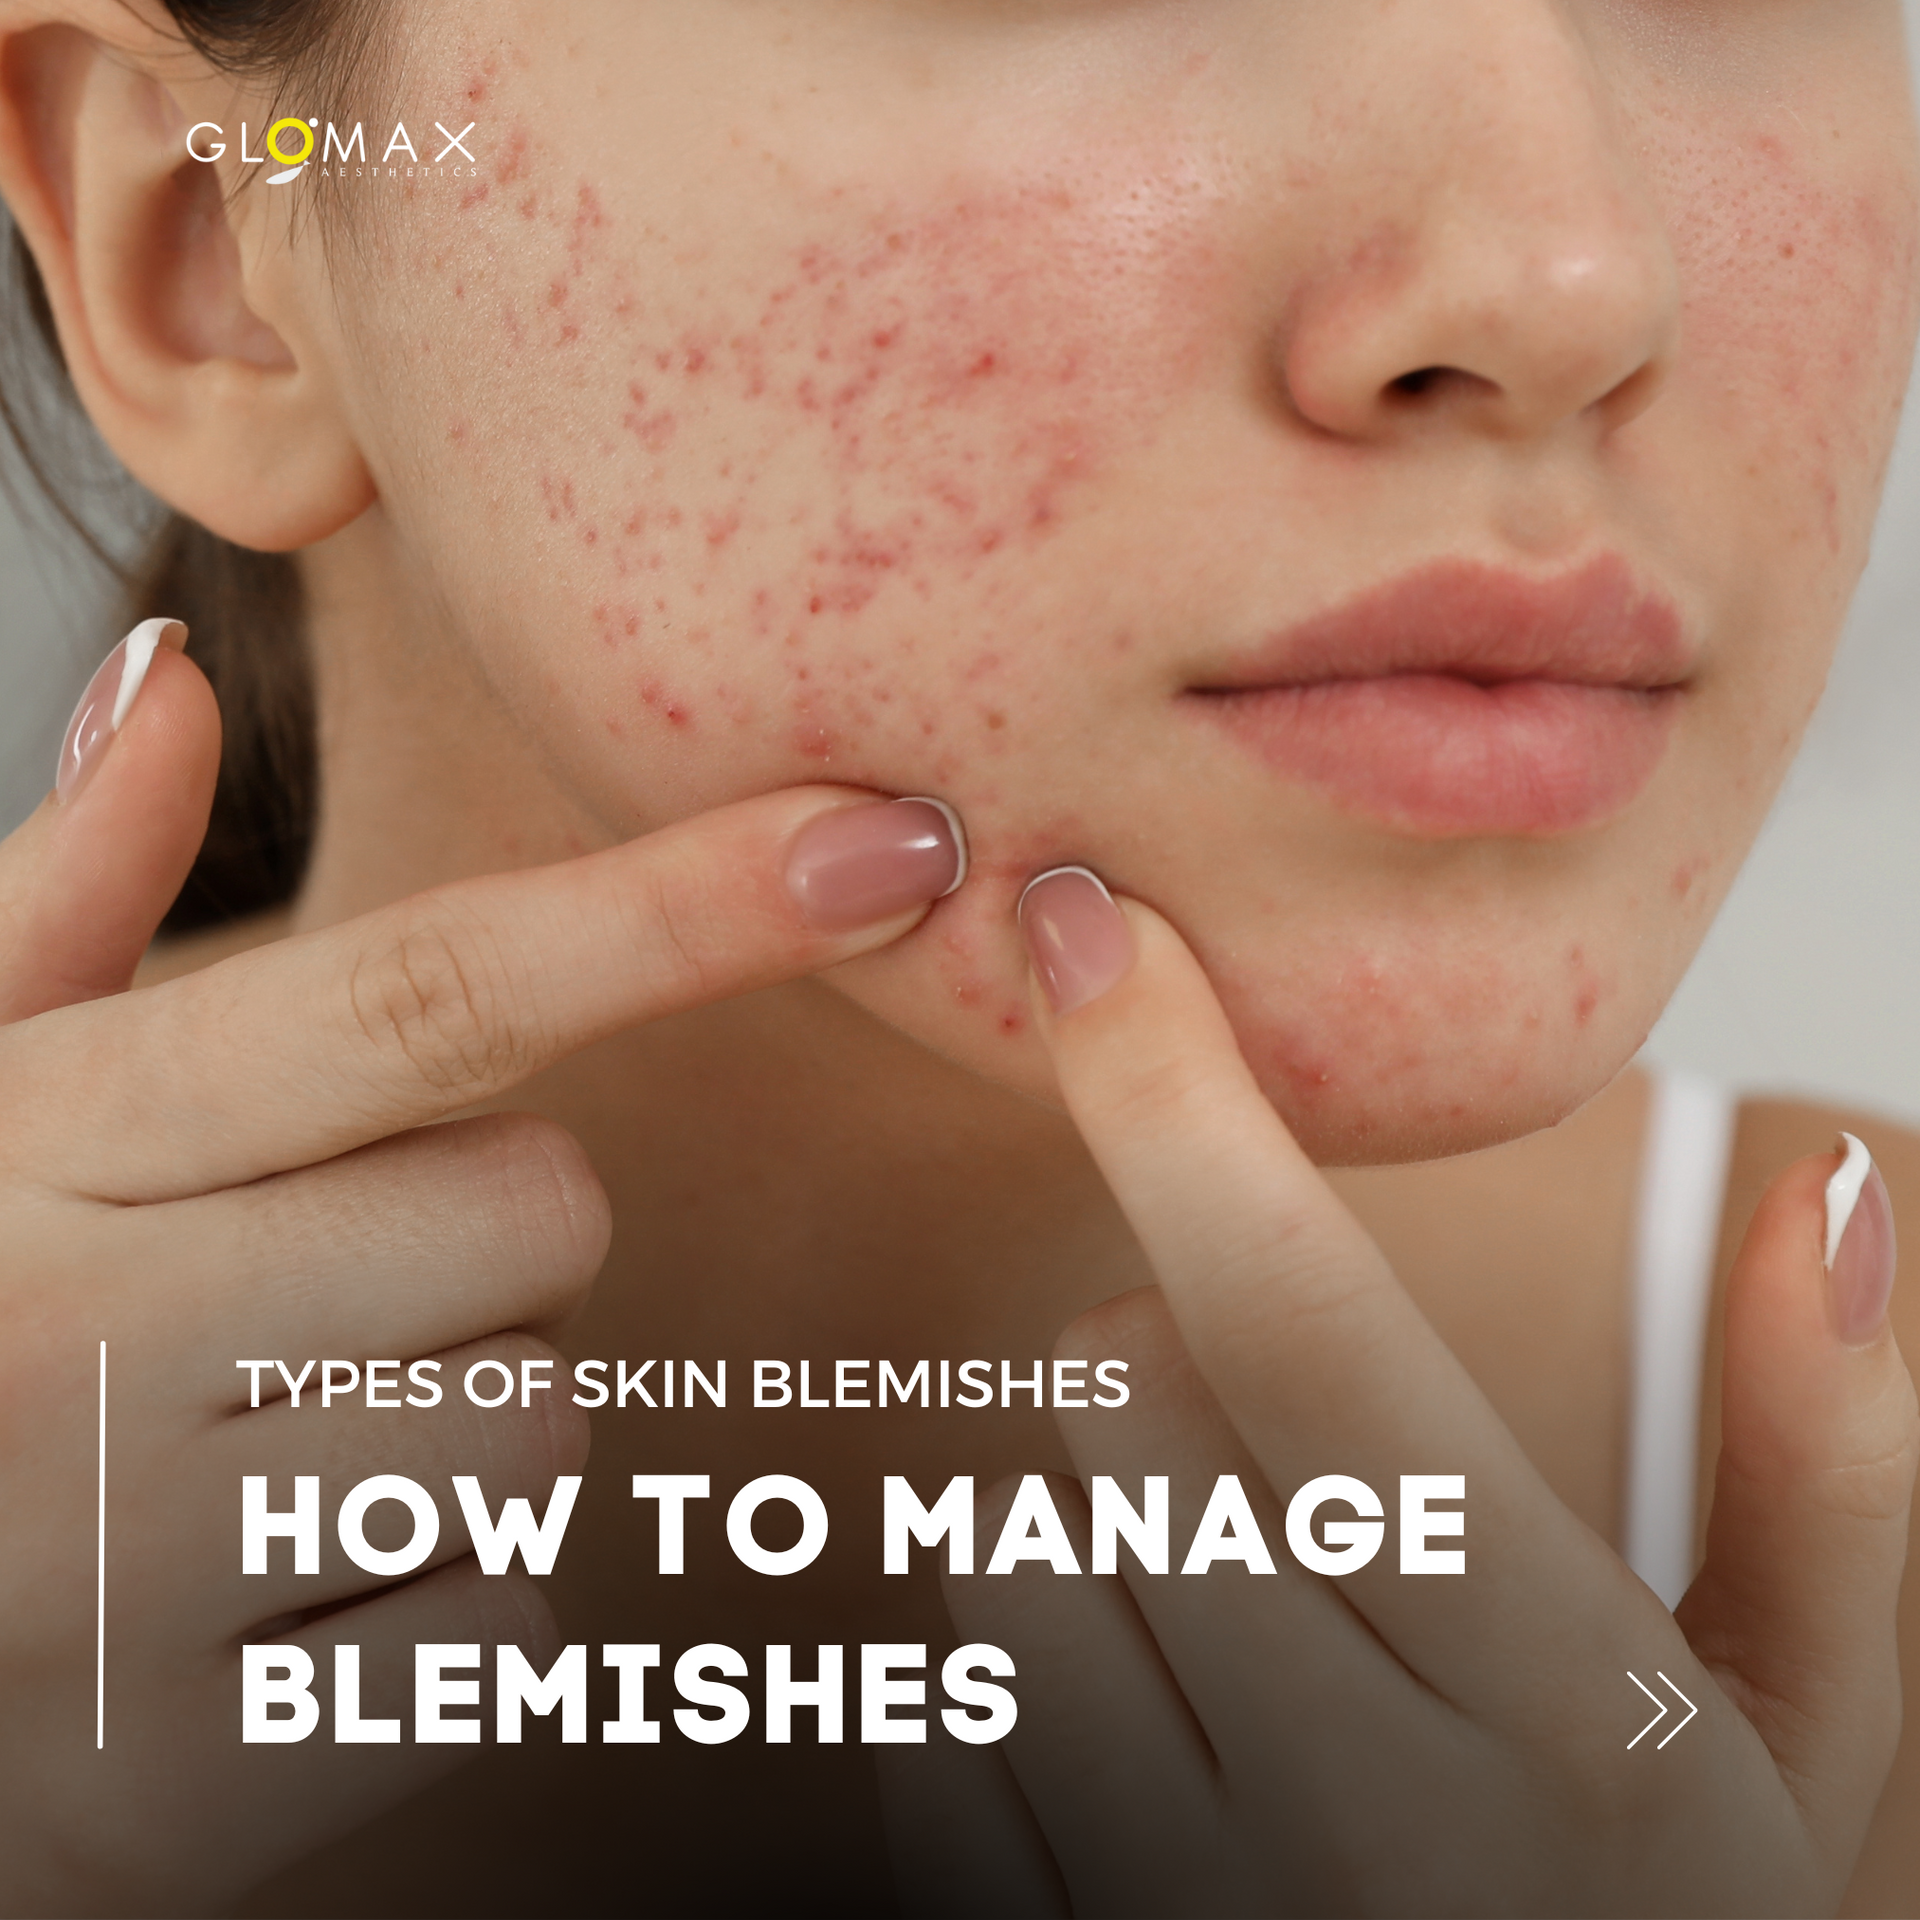 Understanding Blemishes: The Different Types and Their Causes